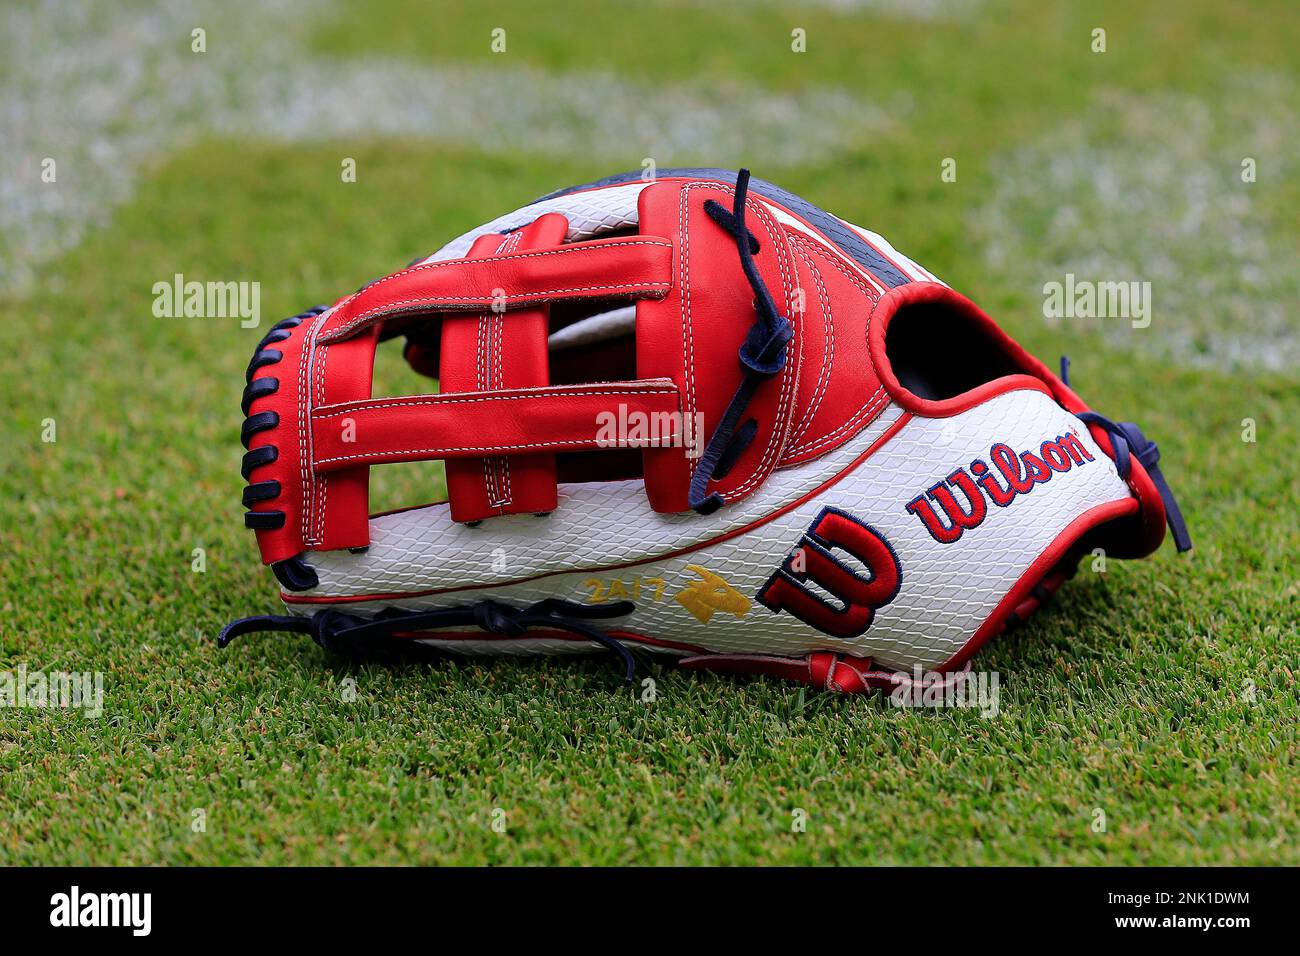 ATLANTA, GA - JUNE 10: The Wilson Sporting Goods baseball glove of Michael  Harris II (23) of the Atlanta Braves on the field prior to the Friday  evening MLB game between the